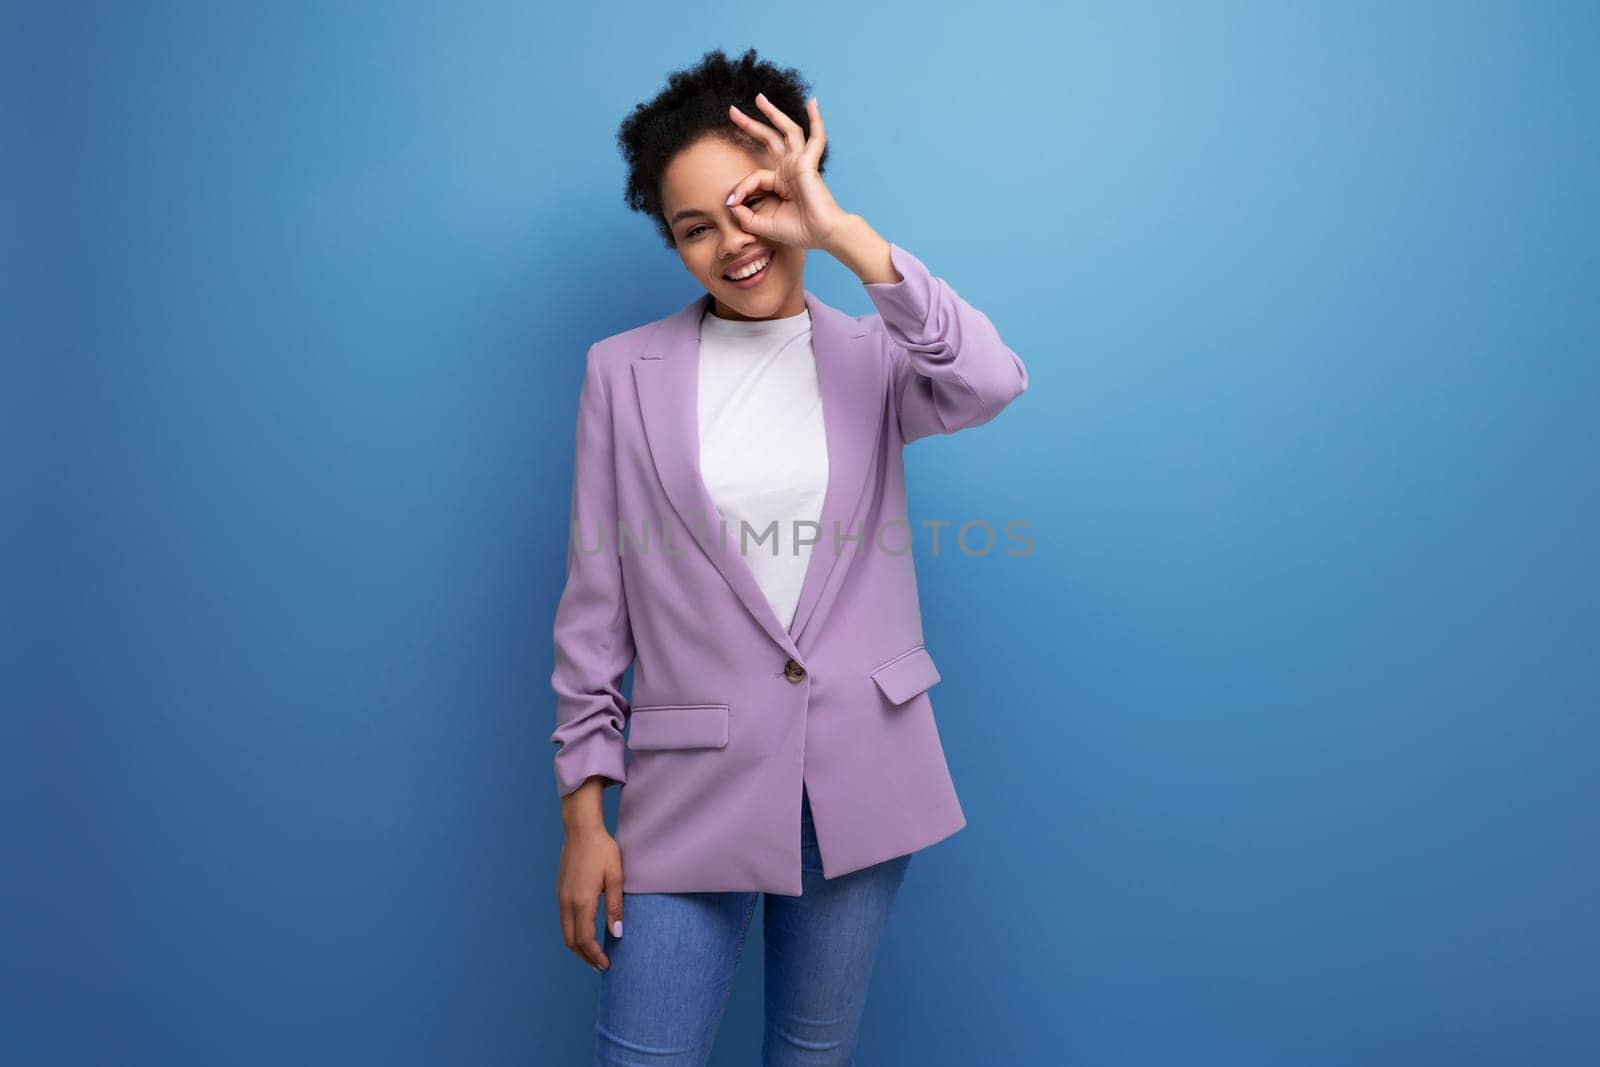 young charming successful hispanic business woman with curly hair dressed in a purple jacket on a blue background with copy space.